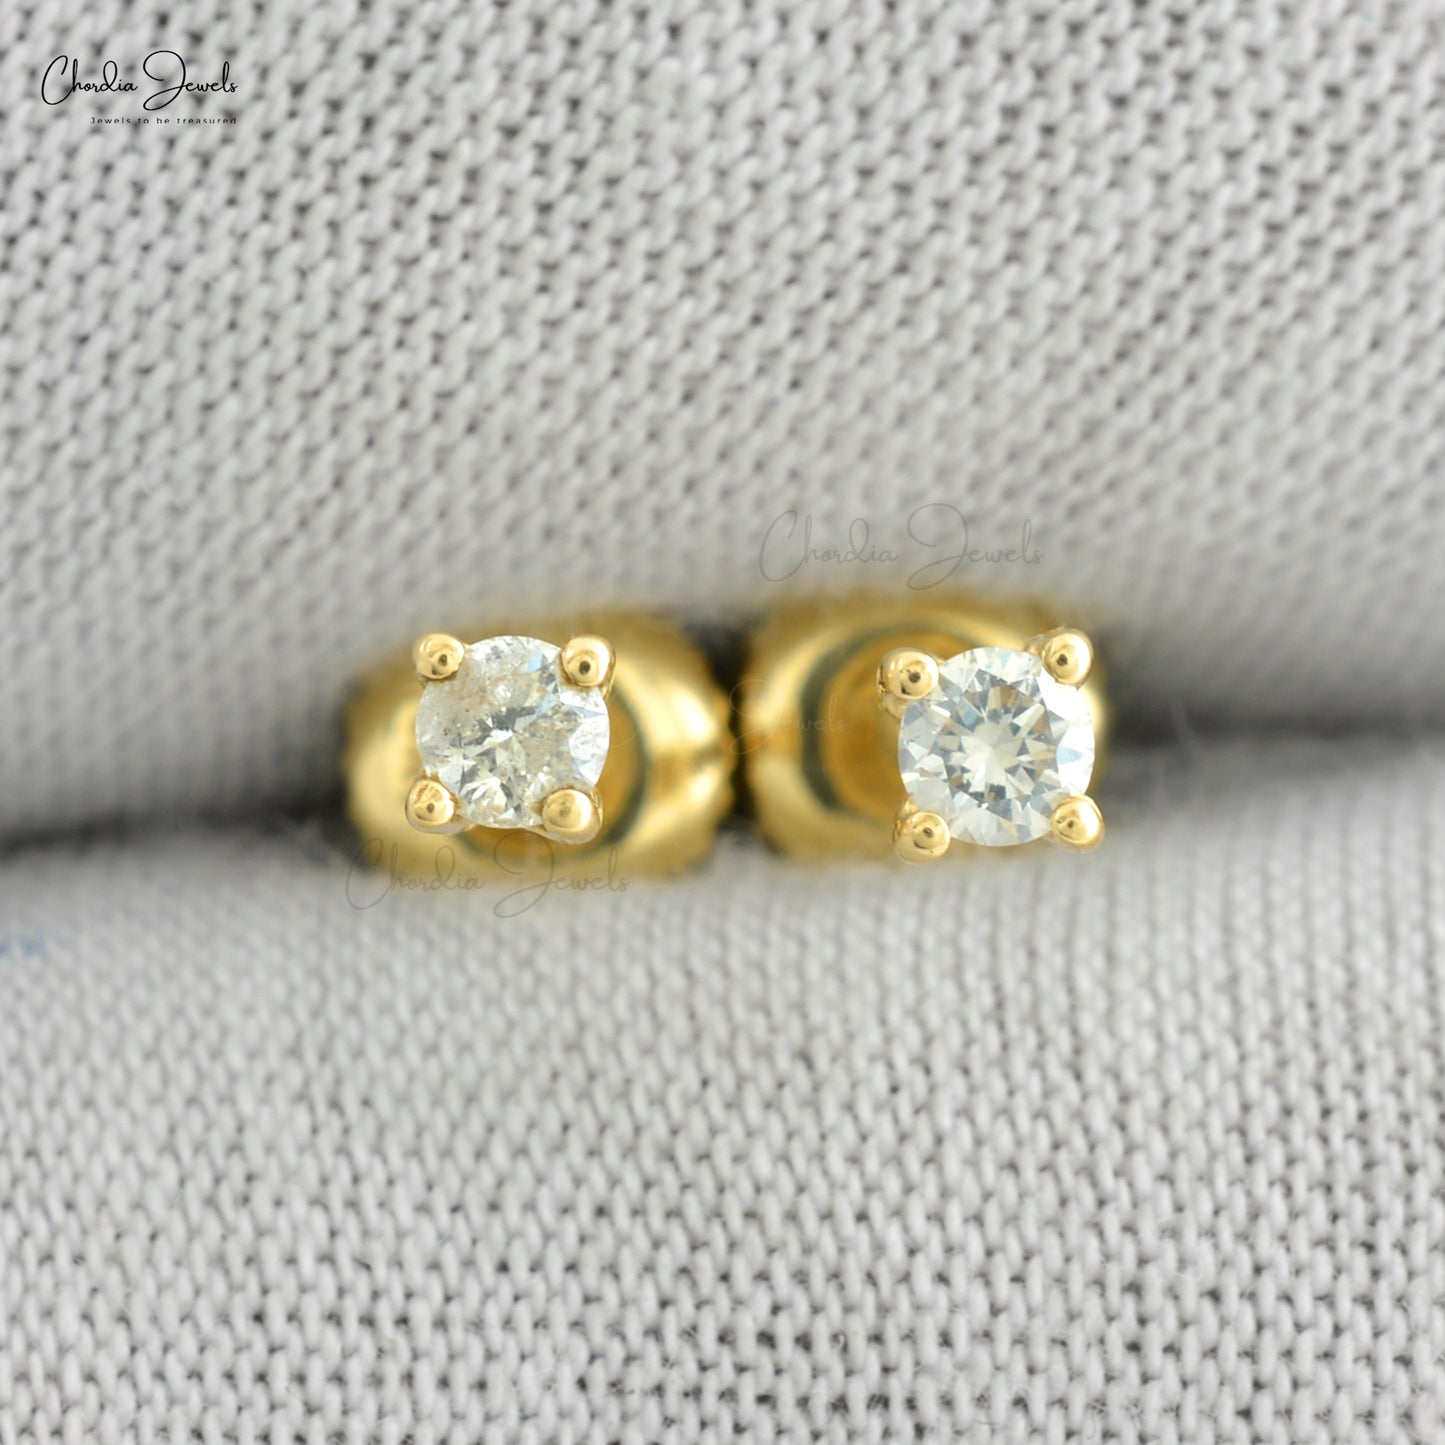 New Trendy Shiny Exaggerated Natural White Diamond Stud Earrings Real 14k Yellow Gold Diamond Studs Engagement Gift